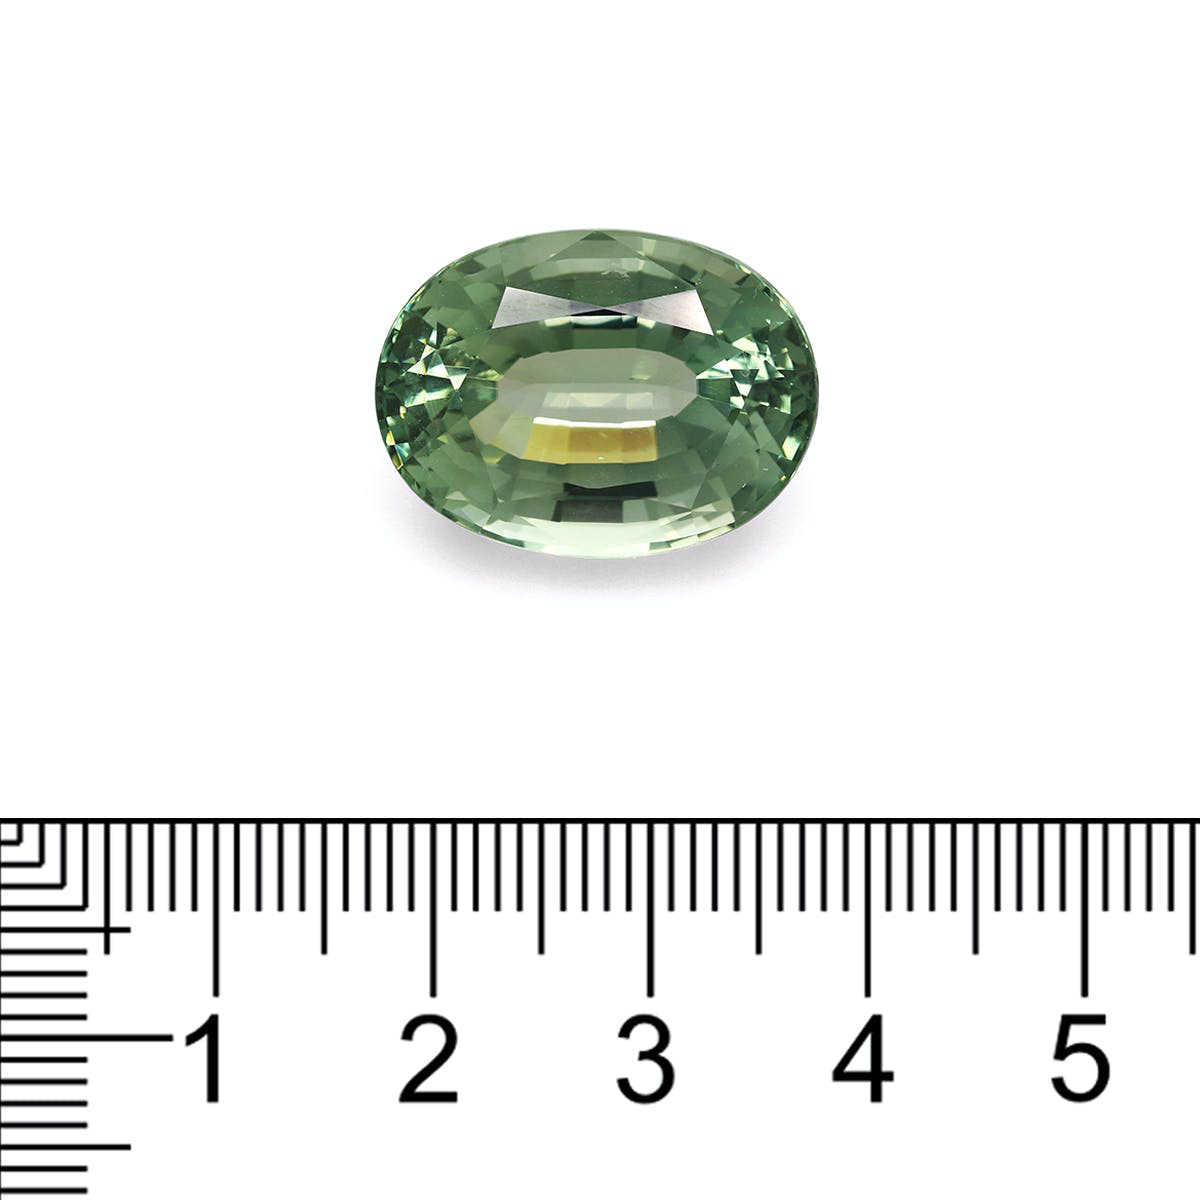 Picture of Mist Green Tourmaline 22.76ct (TG0254)